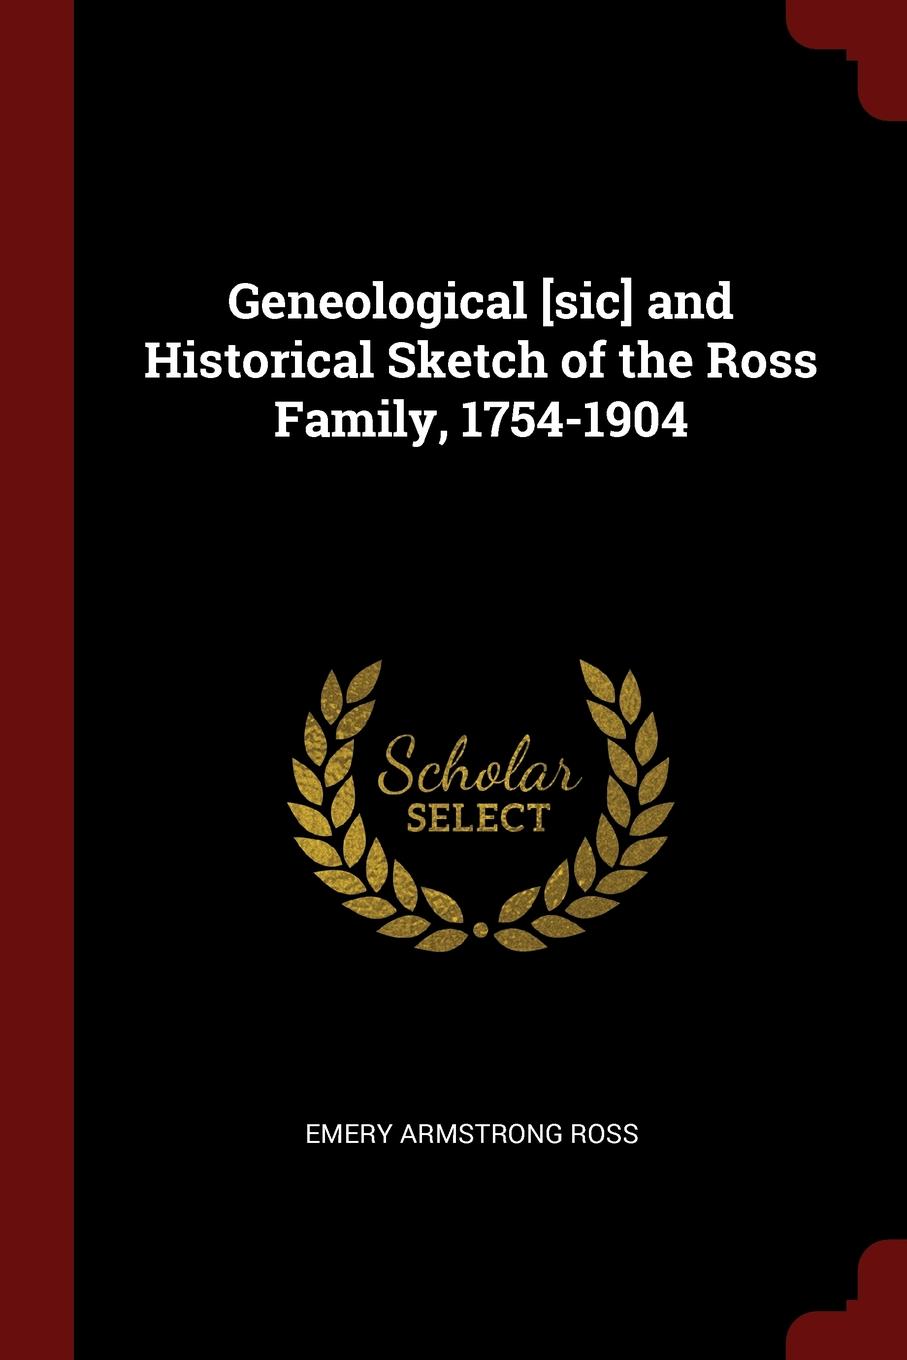 Geneological .sic. and Historical Sketch of the Ross Family, 1754-1904